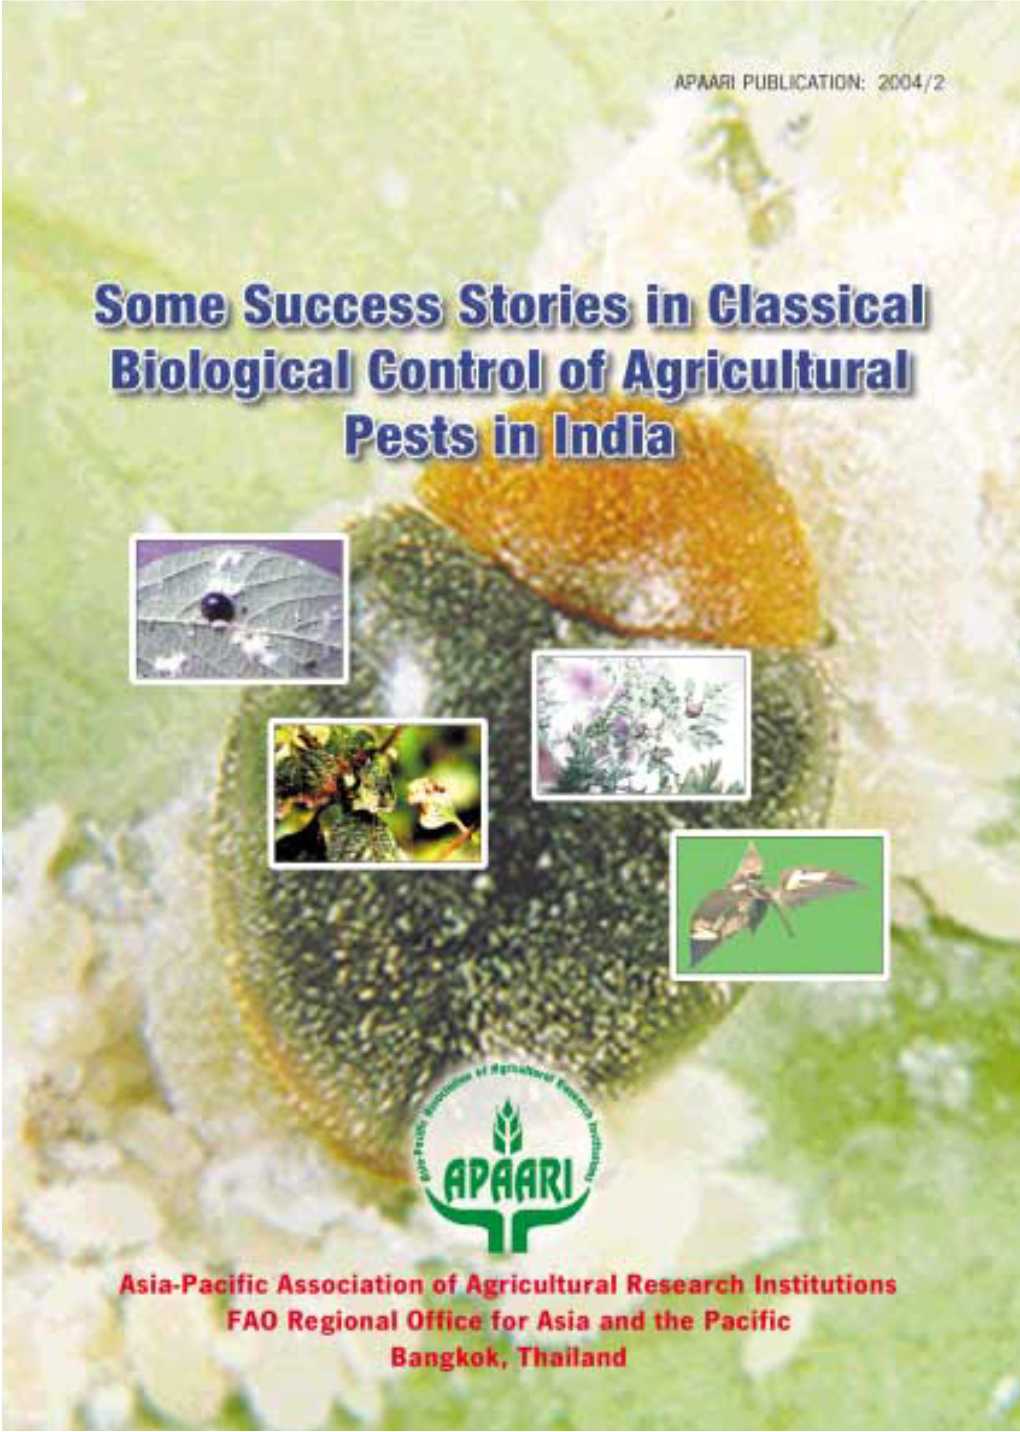 Some Success Stories in Classical Biological Control in India 1 Some Success Stories in Classical Biological Control in India 2